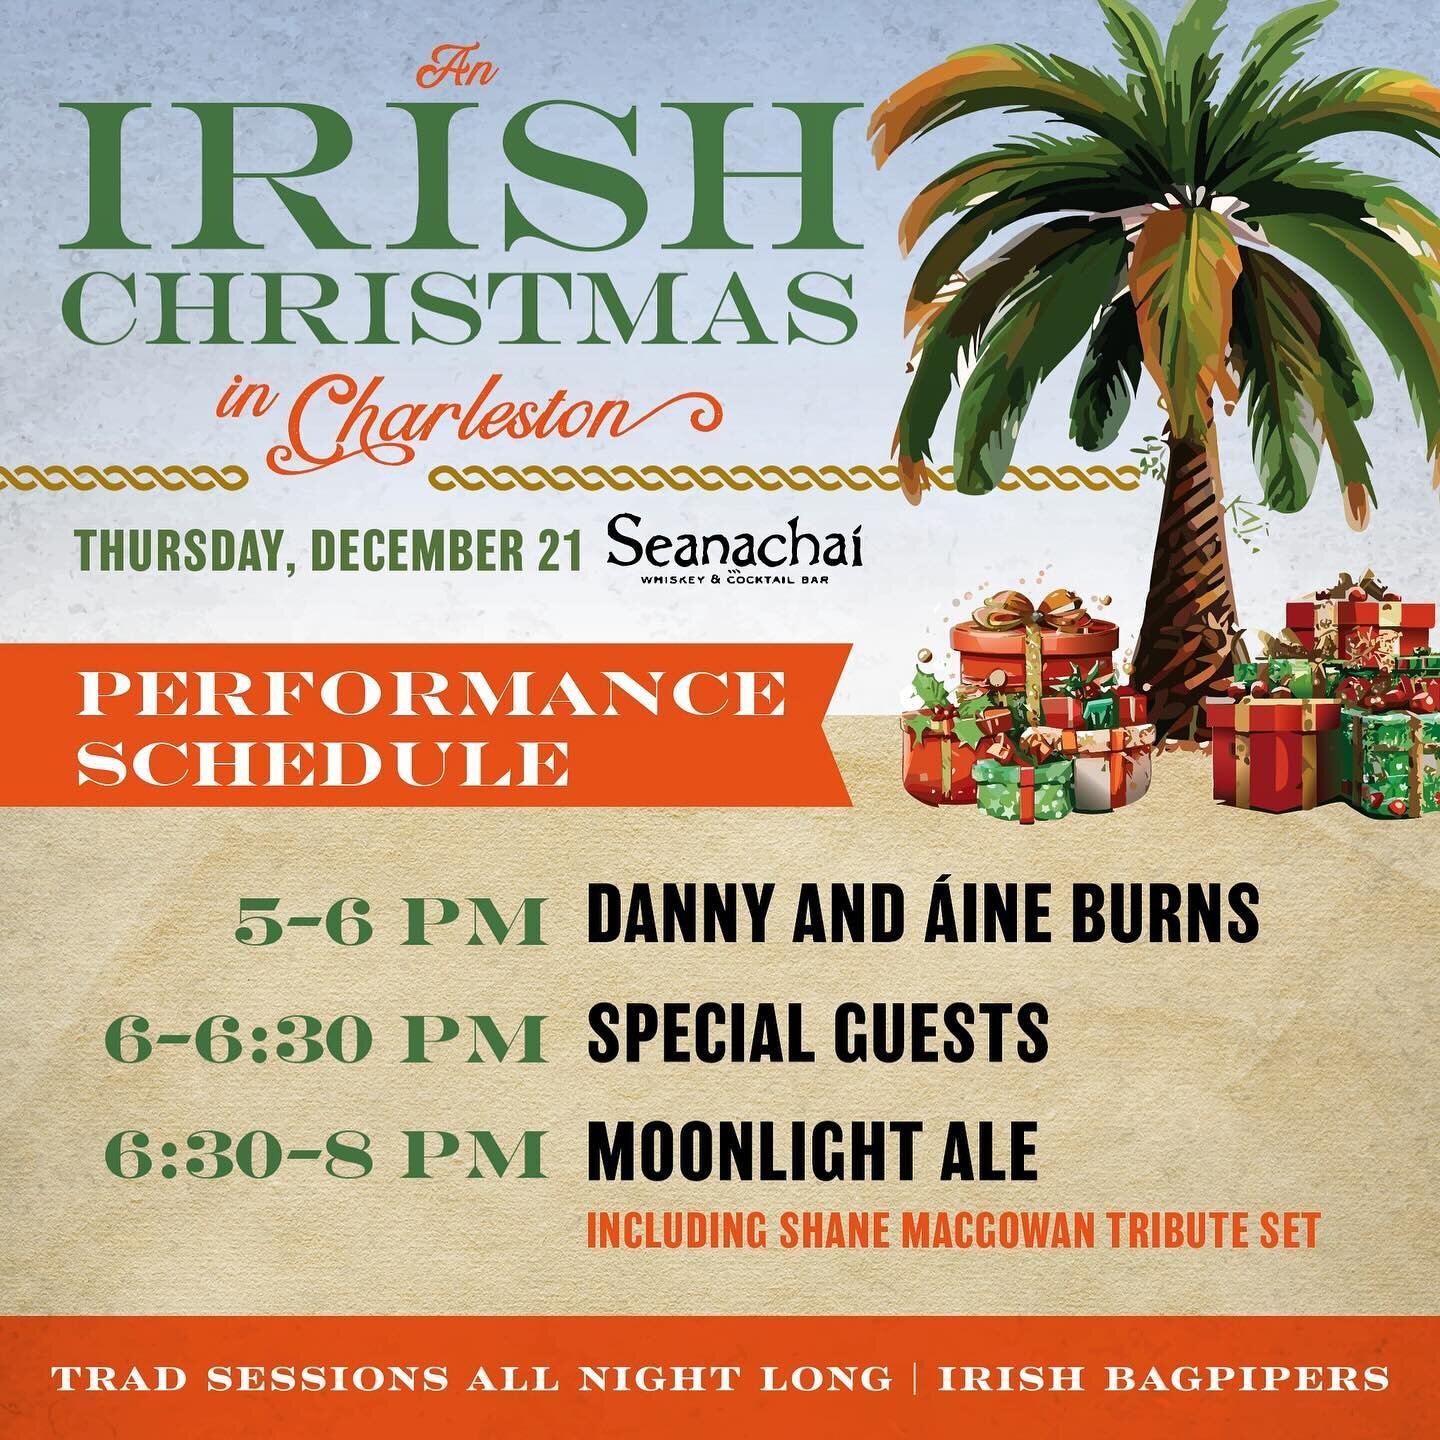 The week is upon us &mdash; only three days til An Irish Christmas in Charleston at Seanachai on John&rsquo;s Island! Here is the lineup for this Thursday. So much great music on tap, come out and celebrate with us!